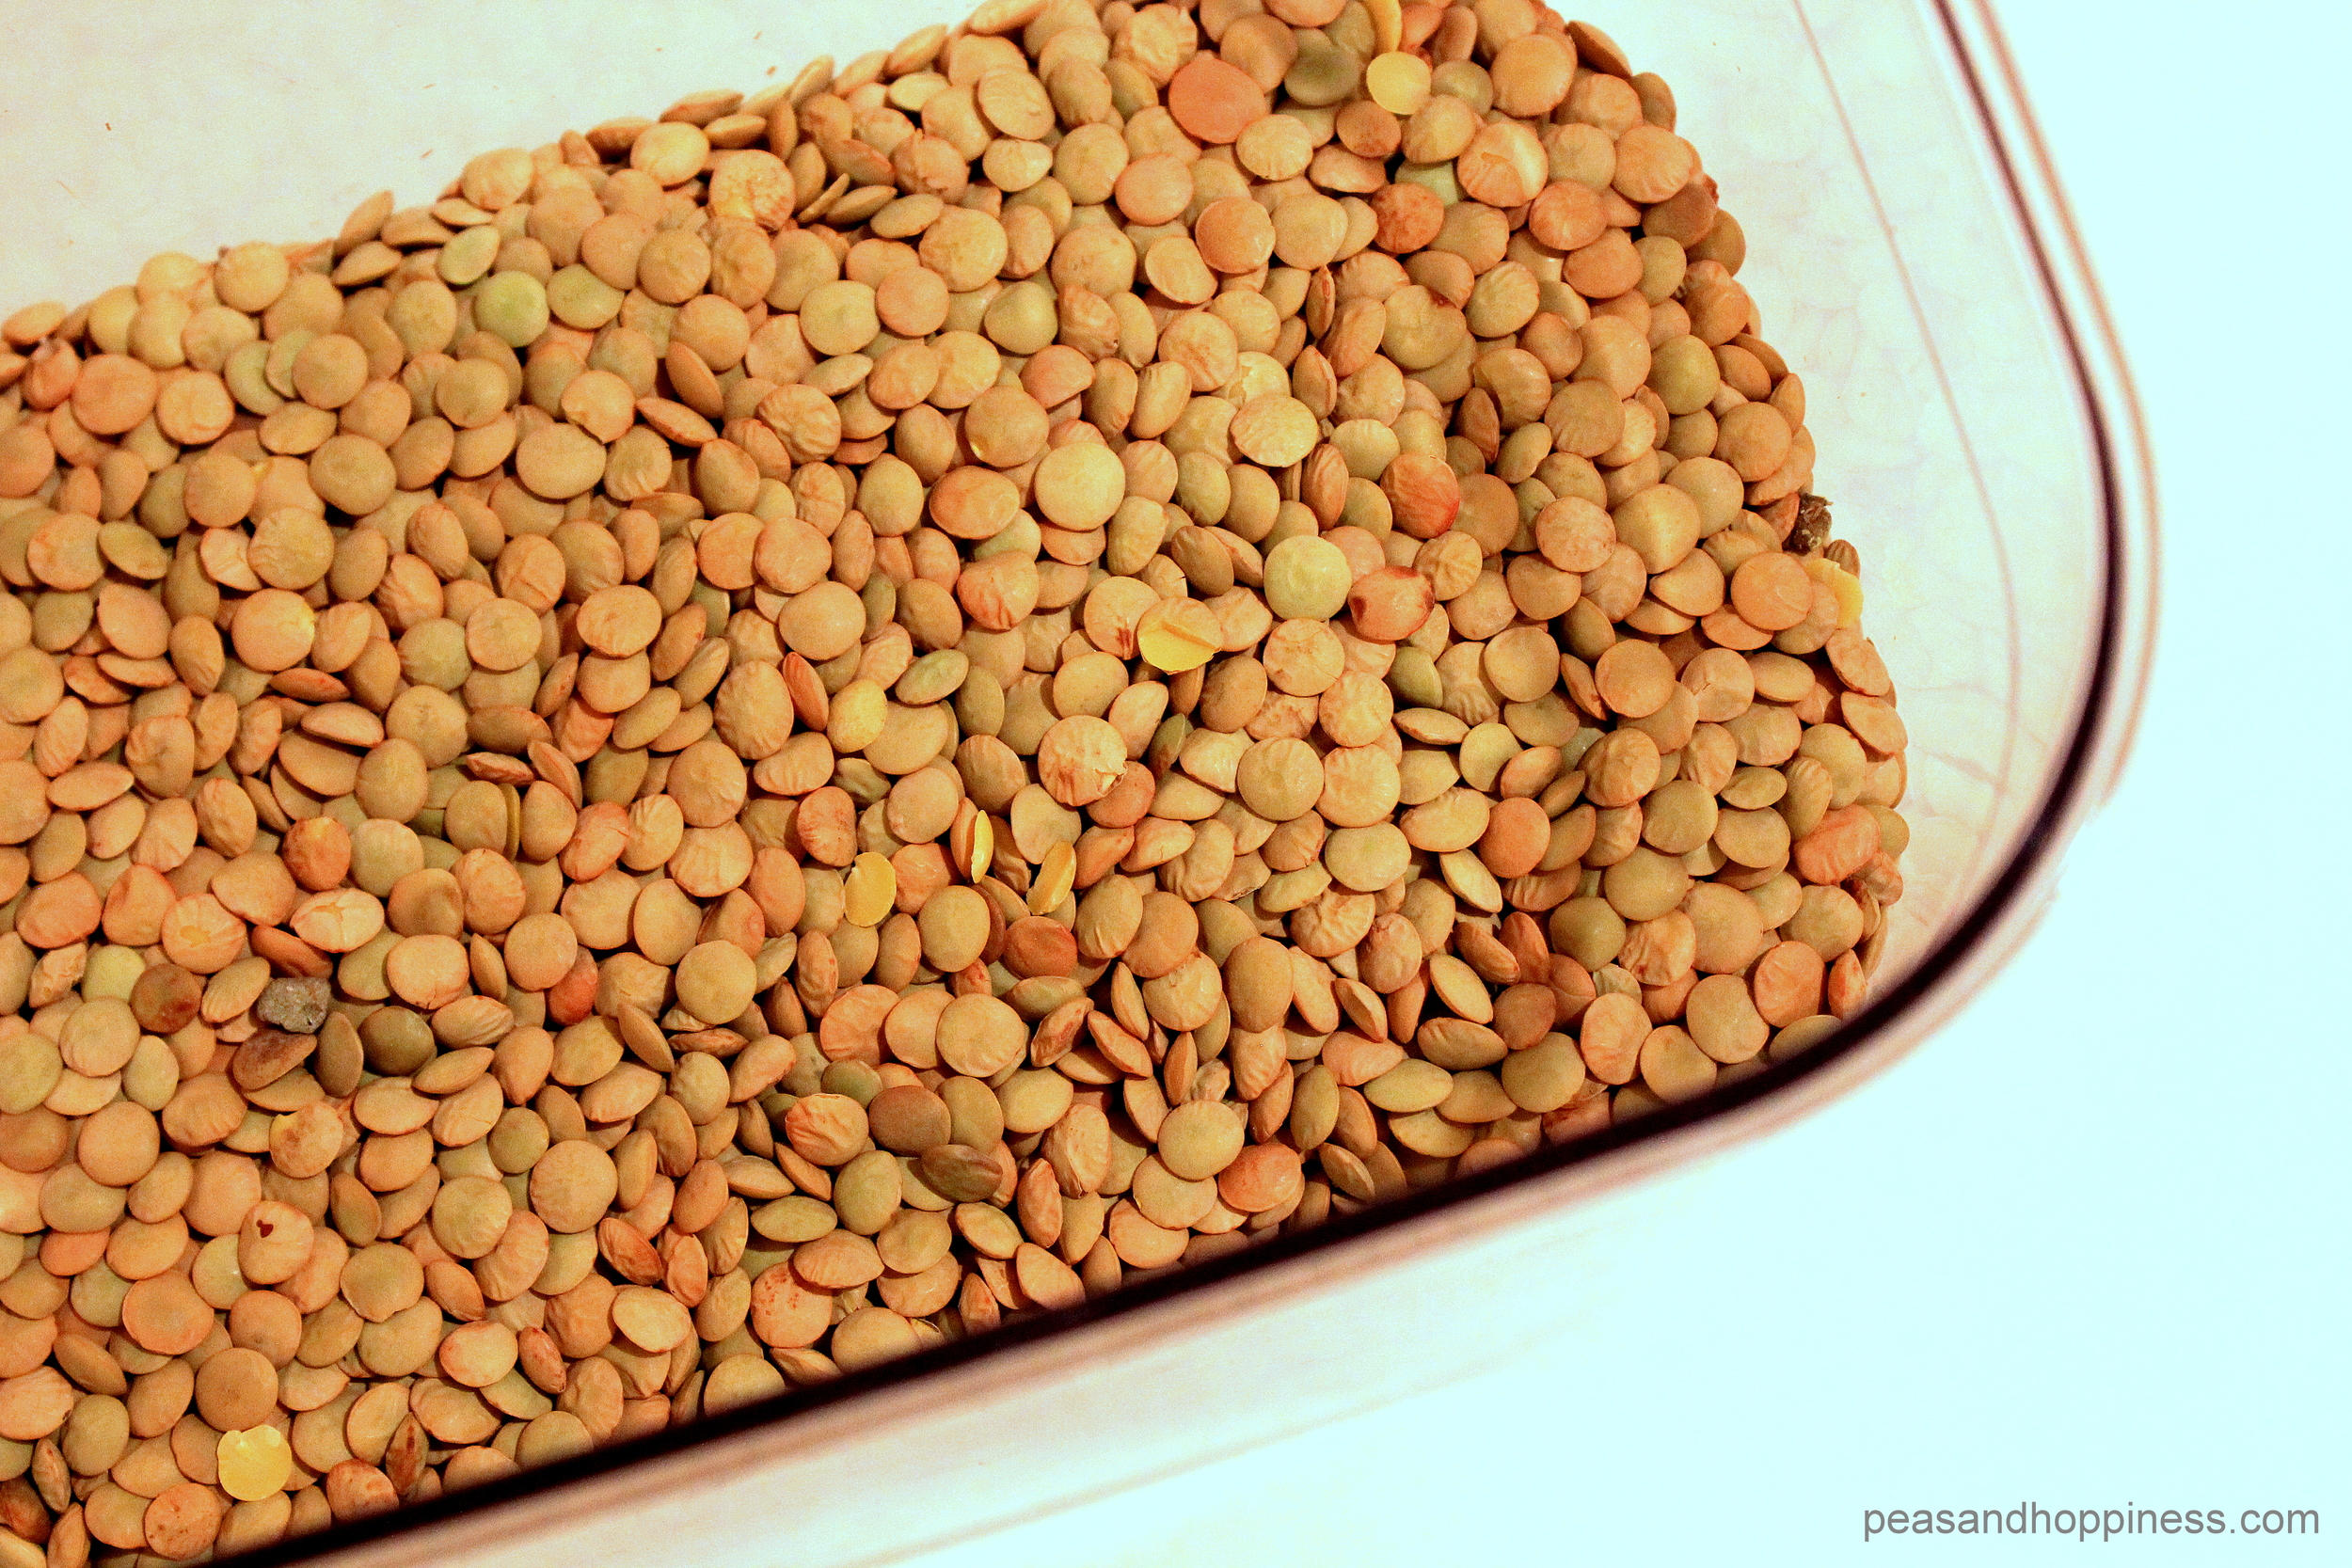 Lentils - Nitrogen from Peas and Hoppiness - www.peasandhoppiness.com